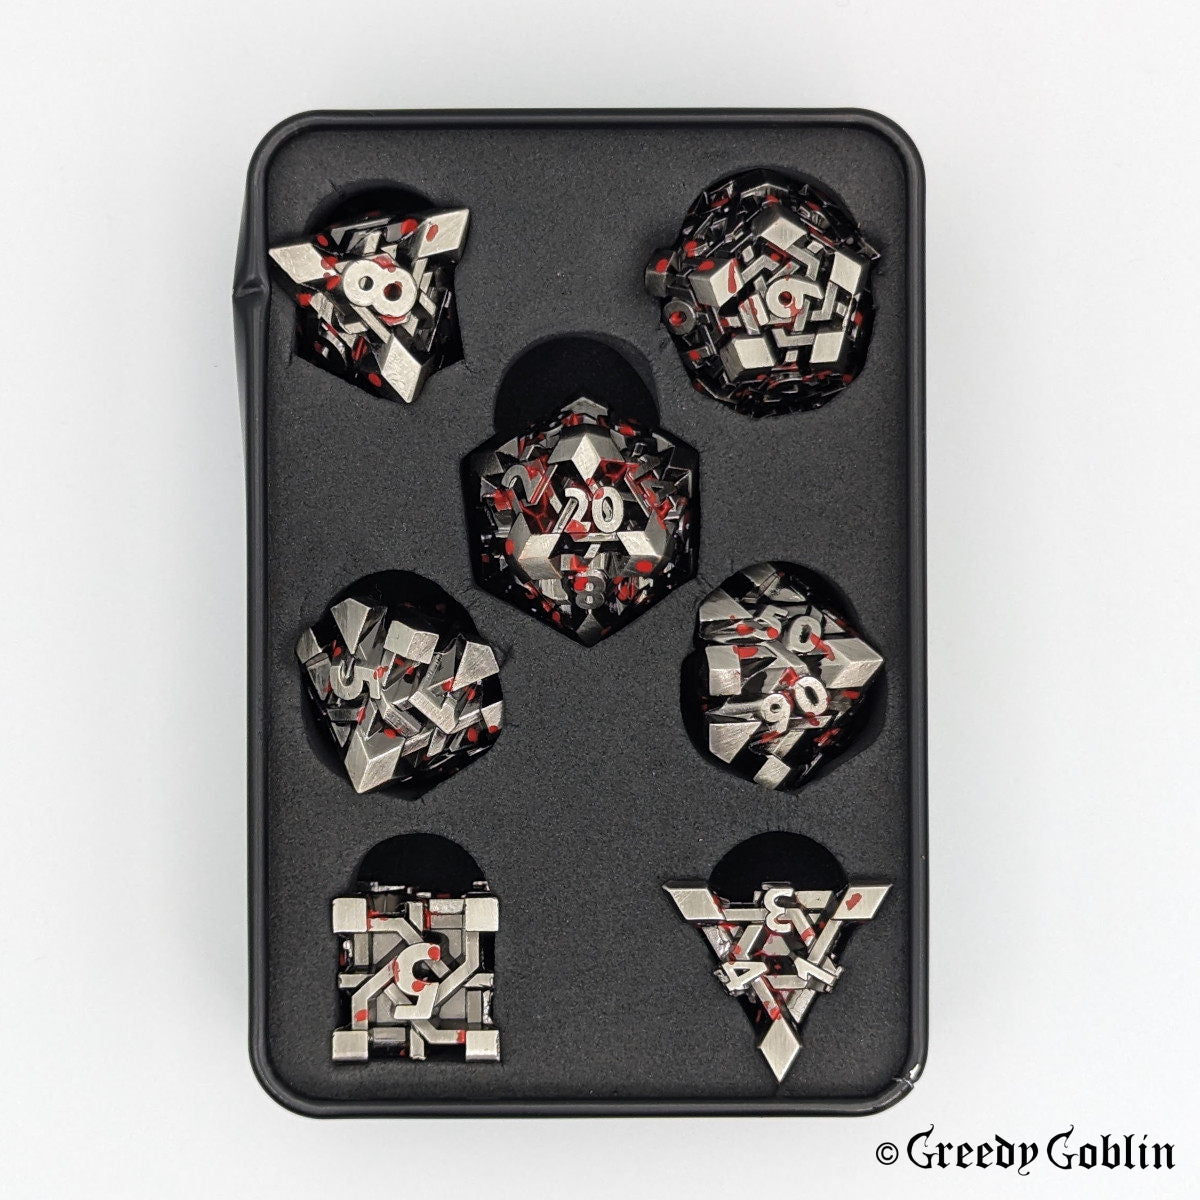 Dwarven Runestone Polydice Set (D100, D8, D12, D10, D6, D20, D4) with metal finish and red splatters, in a tin box. 